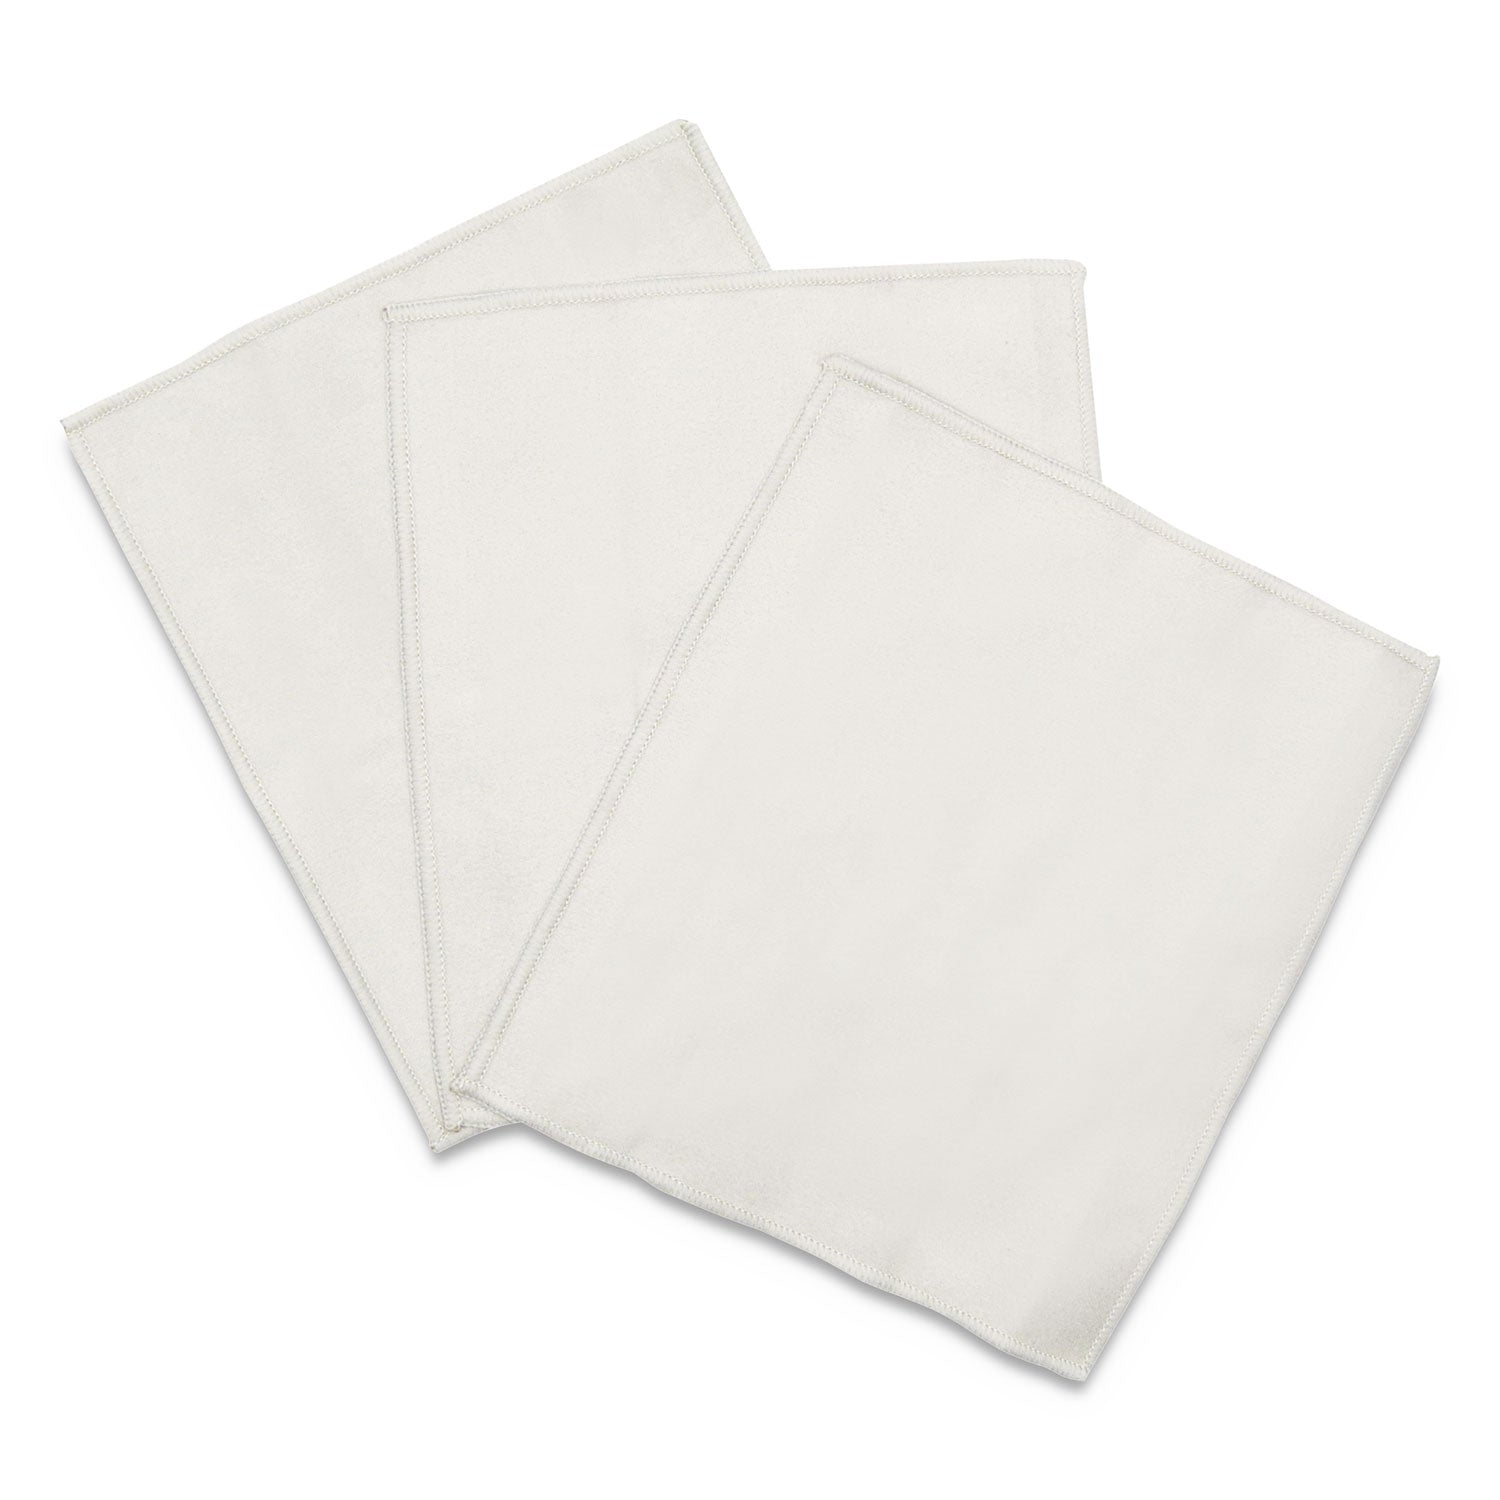 Microfiber Cleaning Cloths, 6 x 7, Unscented, Gray, 3/Pack - 